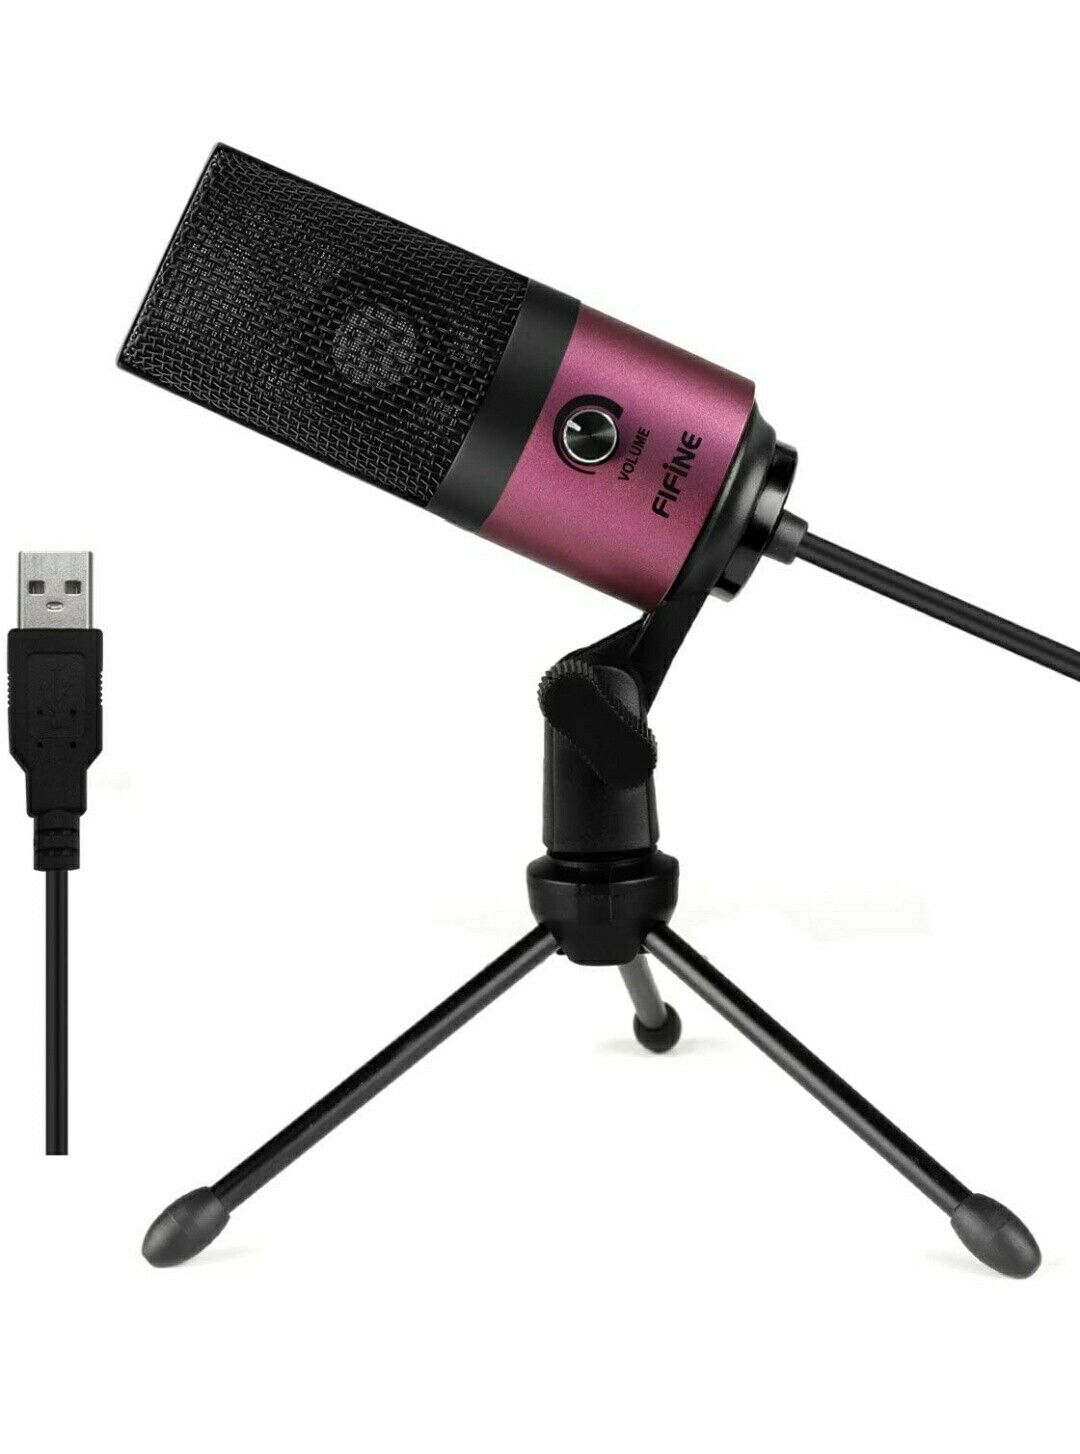 FIFINE K6y9 USB Microphone/ condenser podcast, gaming, streaming